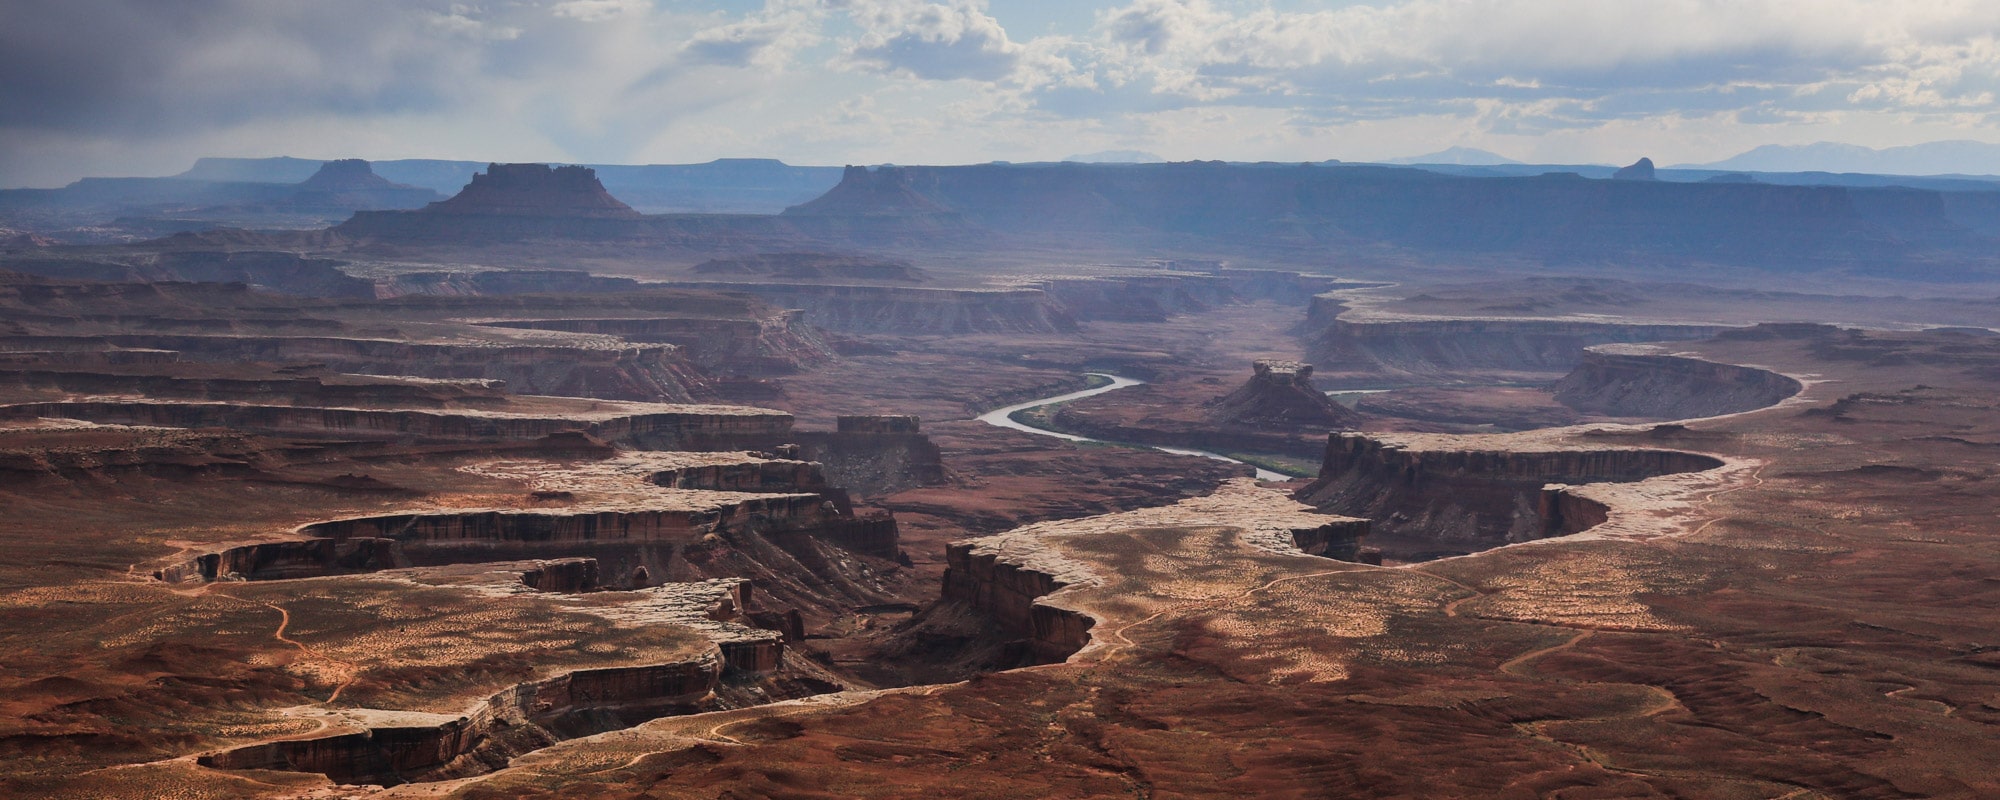 Green River Overlook in Canyonlands National Park, Utah, one of the top viewpoints in the national parks